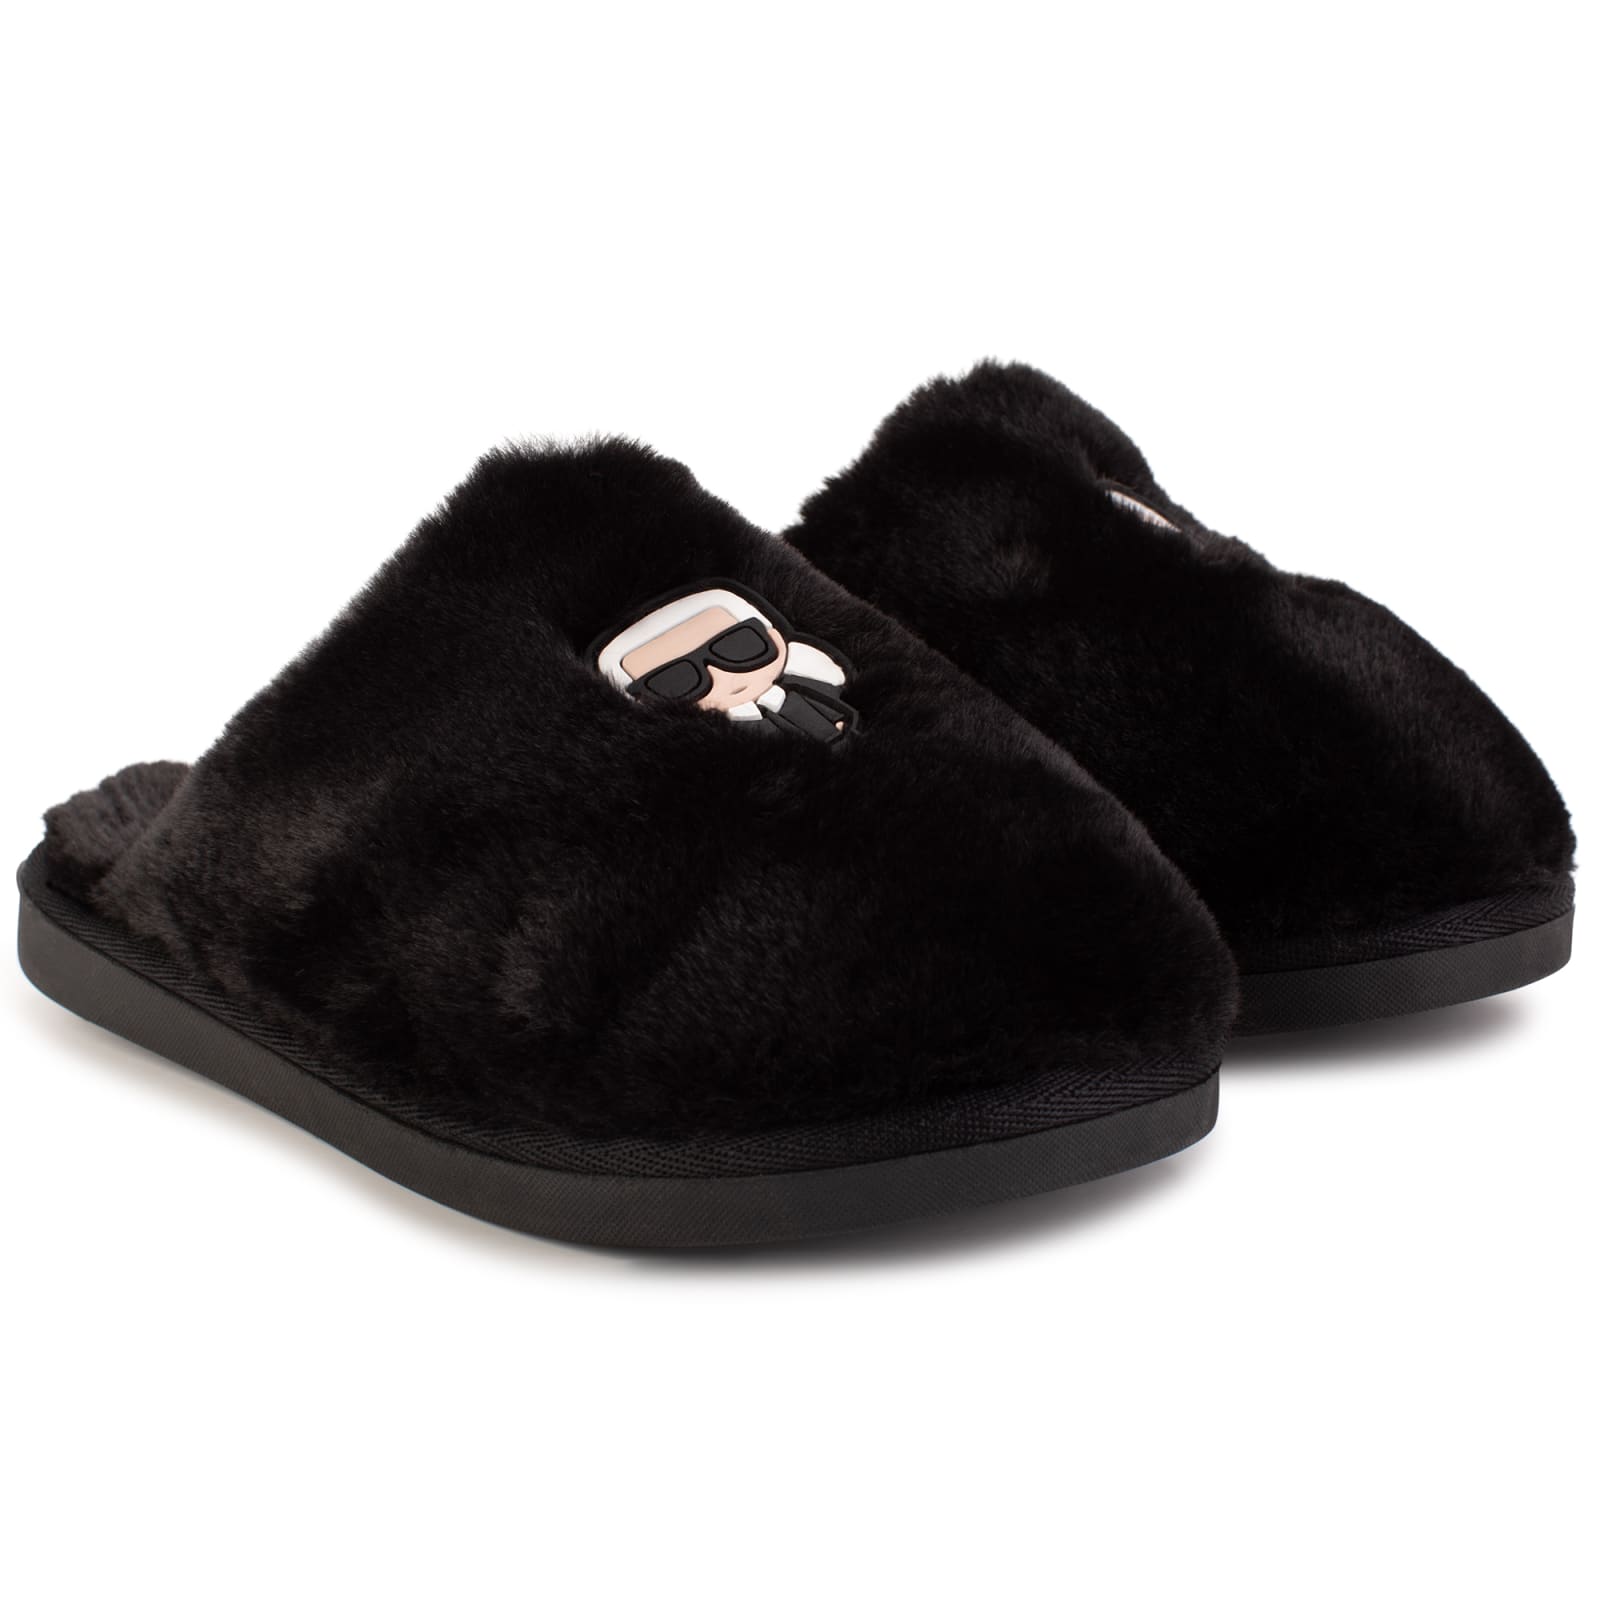 KARL LAGERFELD SLIPPERS WITH LOGO